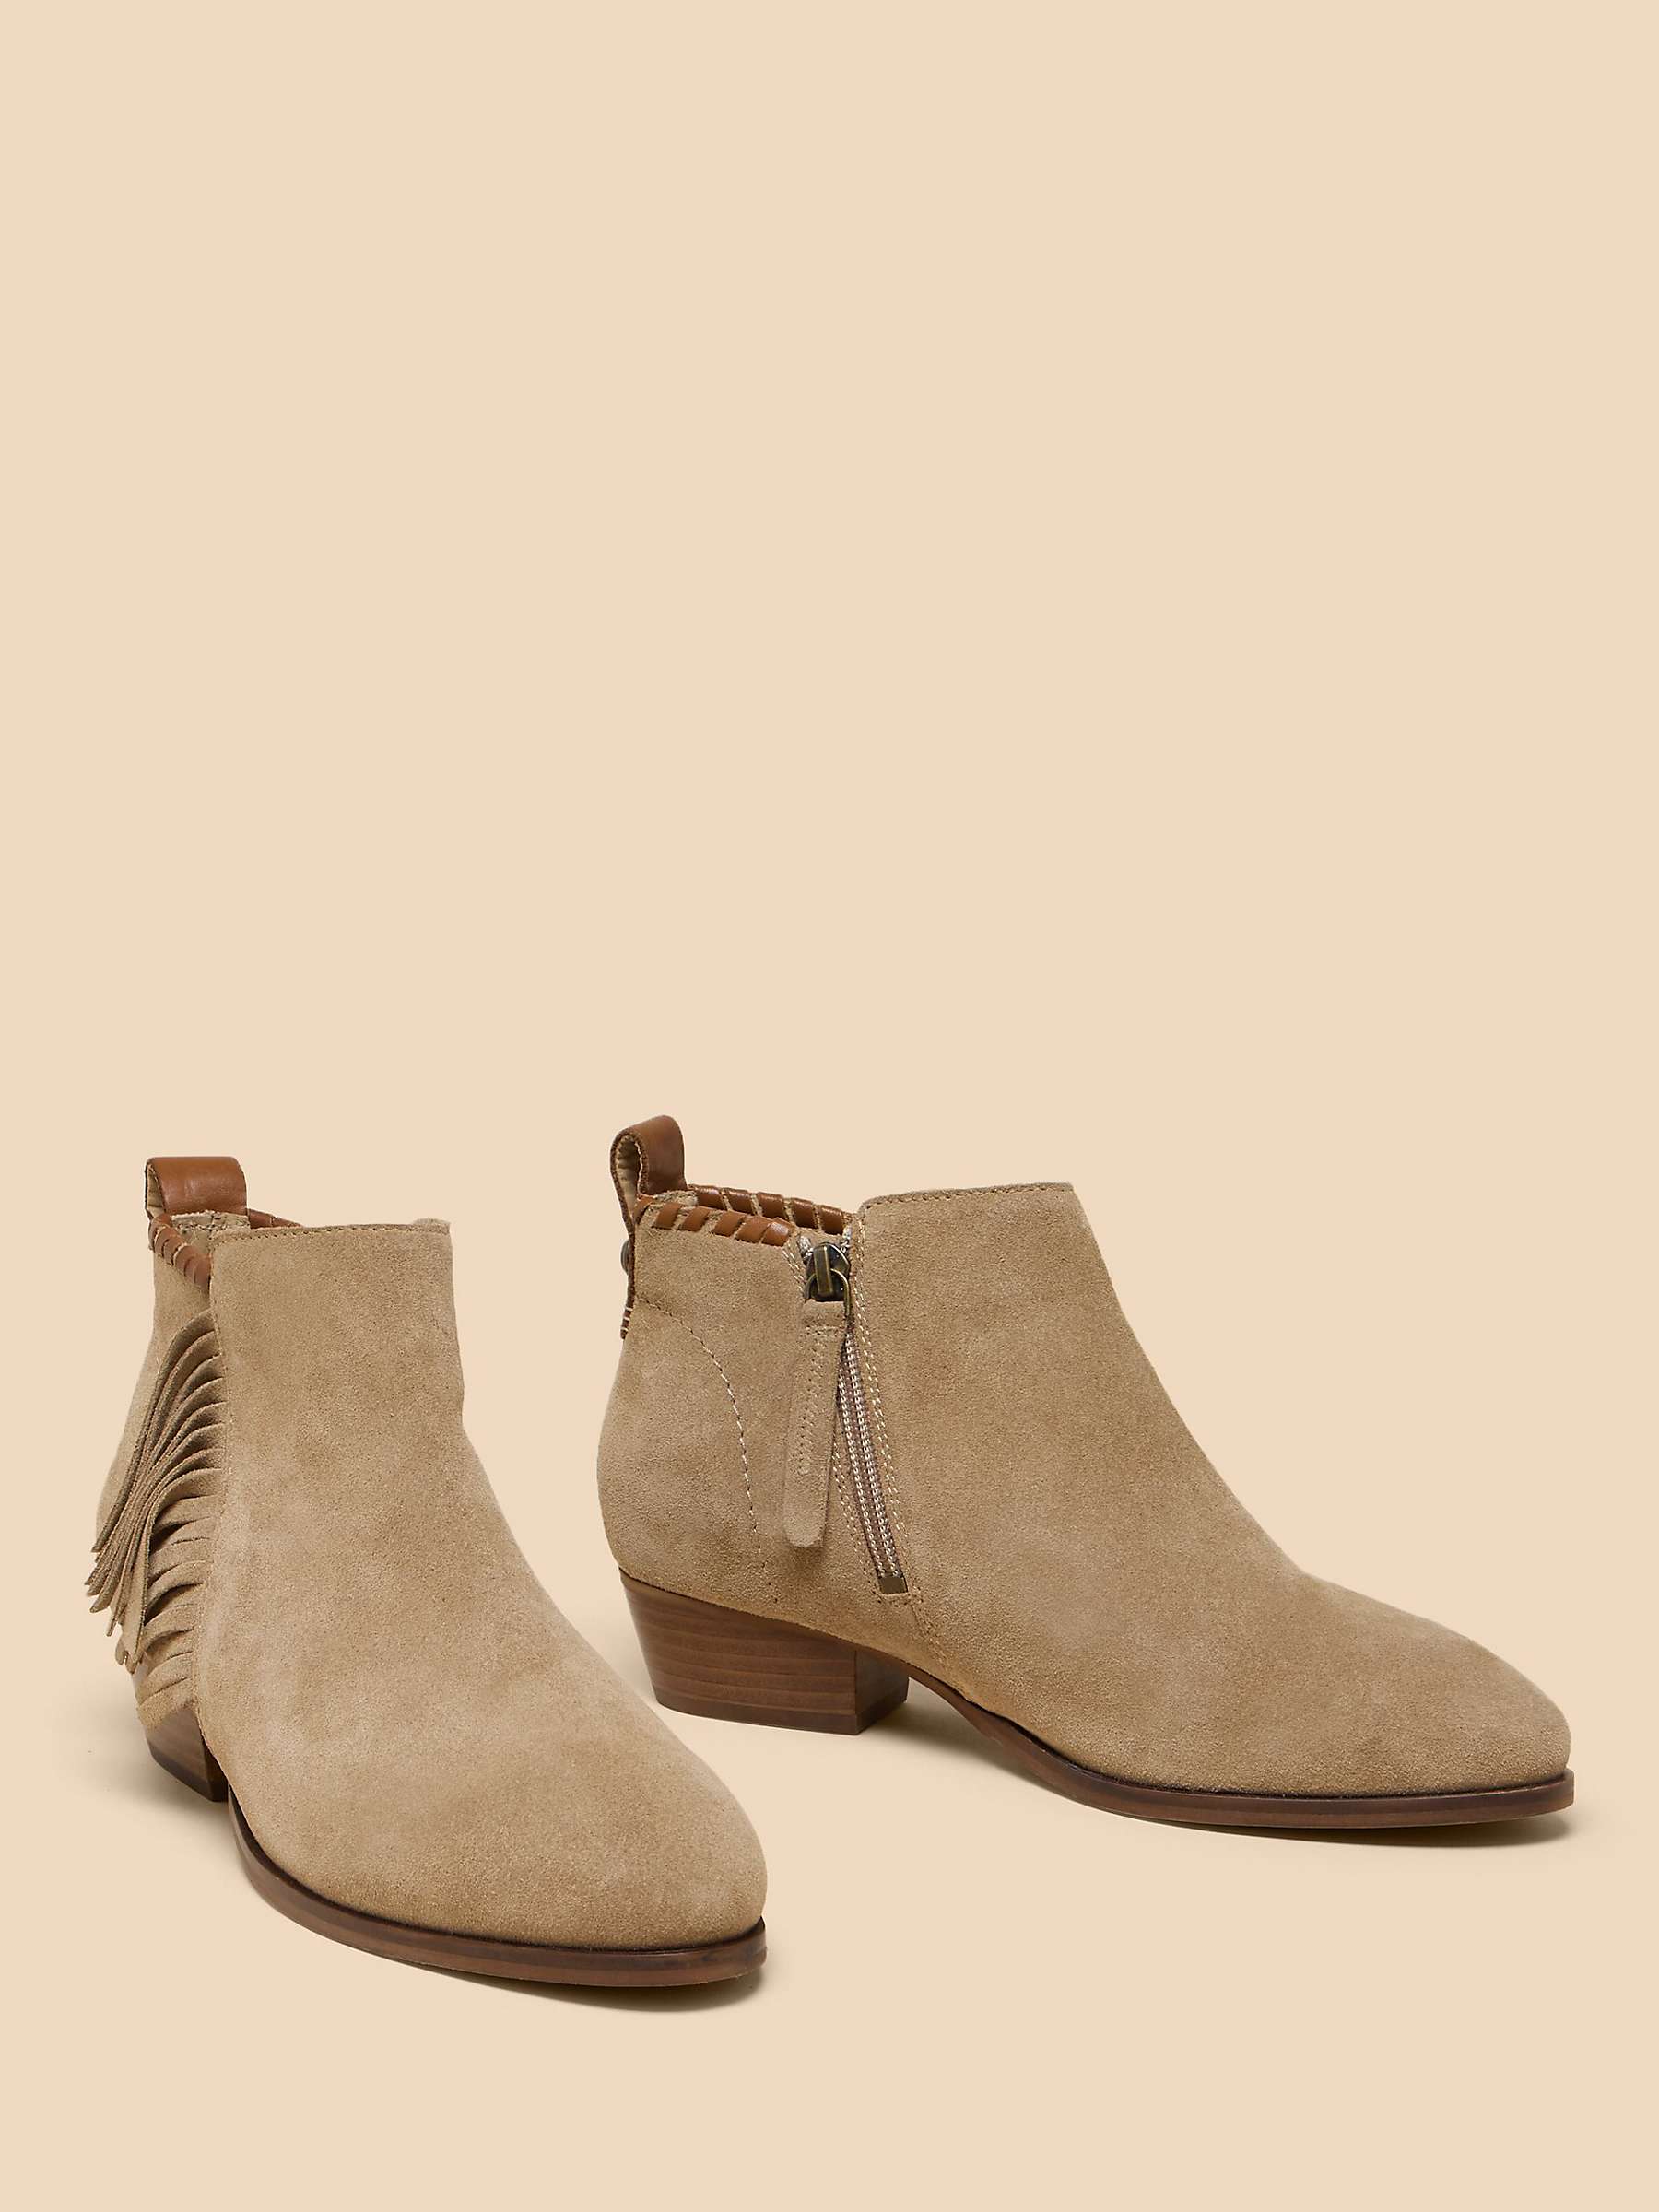 Buy White Stuff  Acacia Suede Fringe Ankle Boots, Light Natural Online at johnlewis.com